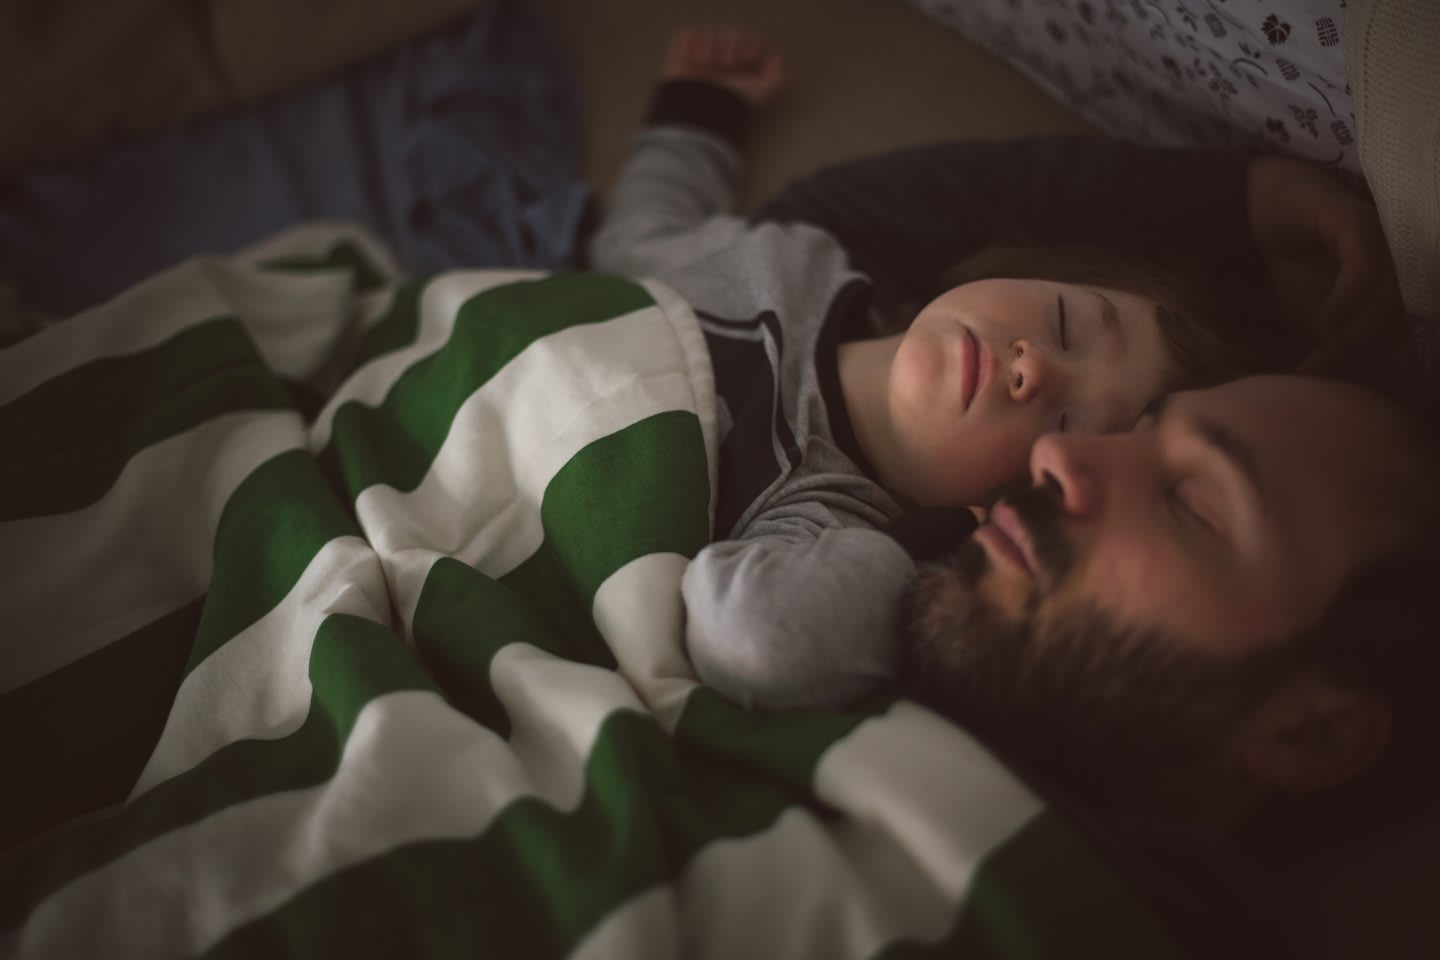 Dad and toddler sleeping together in the sofa, rest, recovery, family, sleep